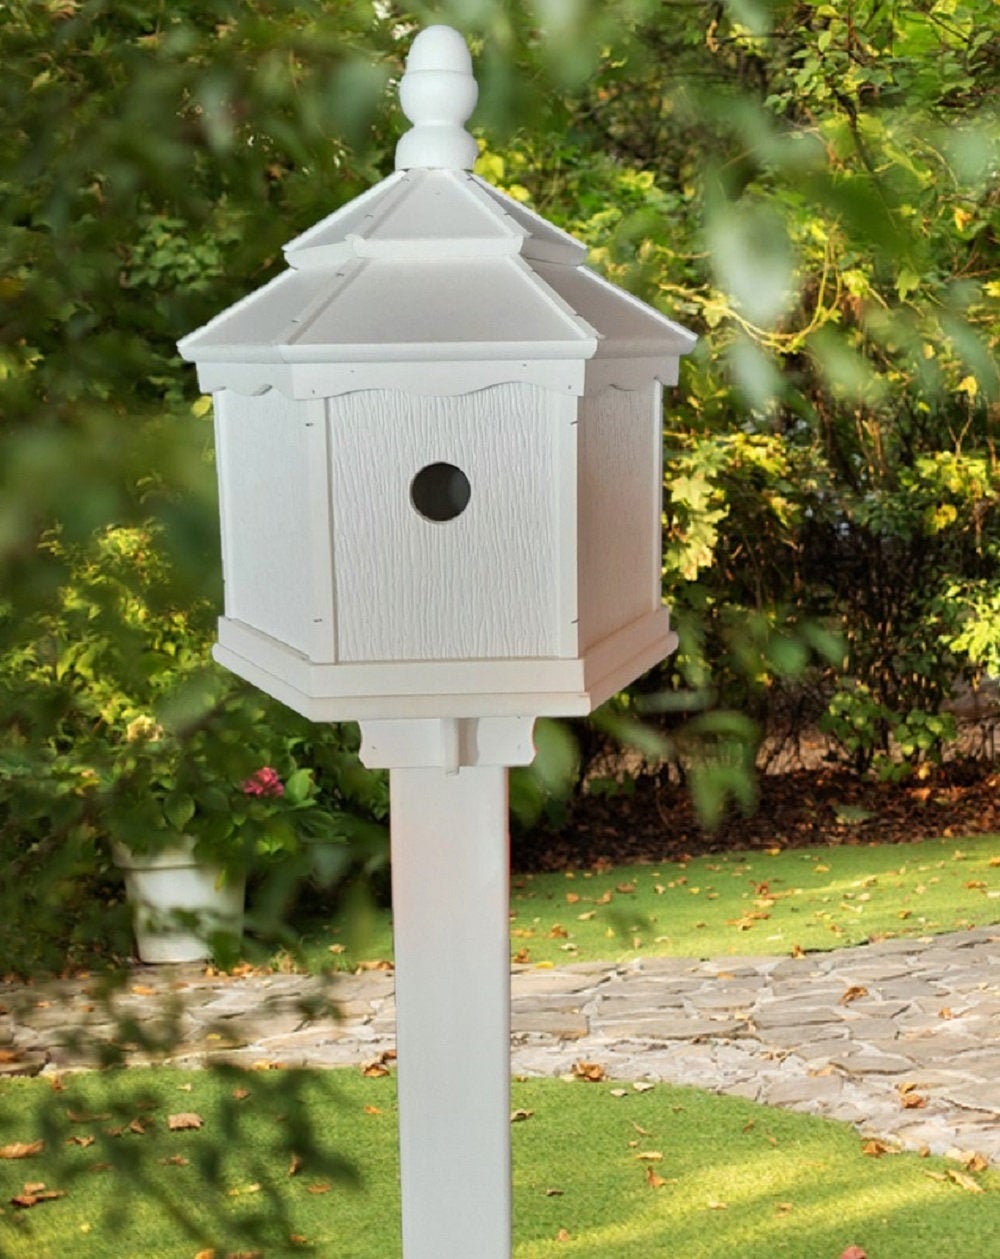 Birdhouse - 3 Nesting Compartments - Amish Handmade - All White - Weather Resistant - Made of Poly Lumber - Birdhouse Outdoor